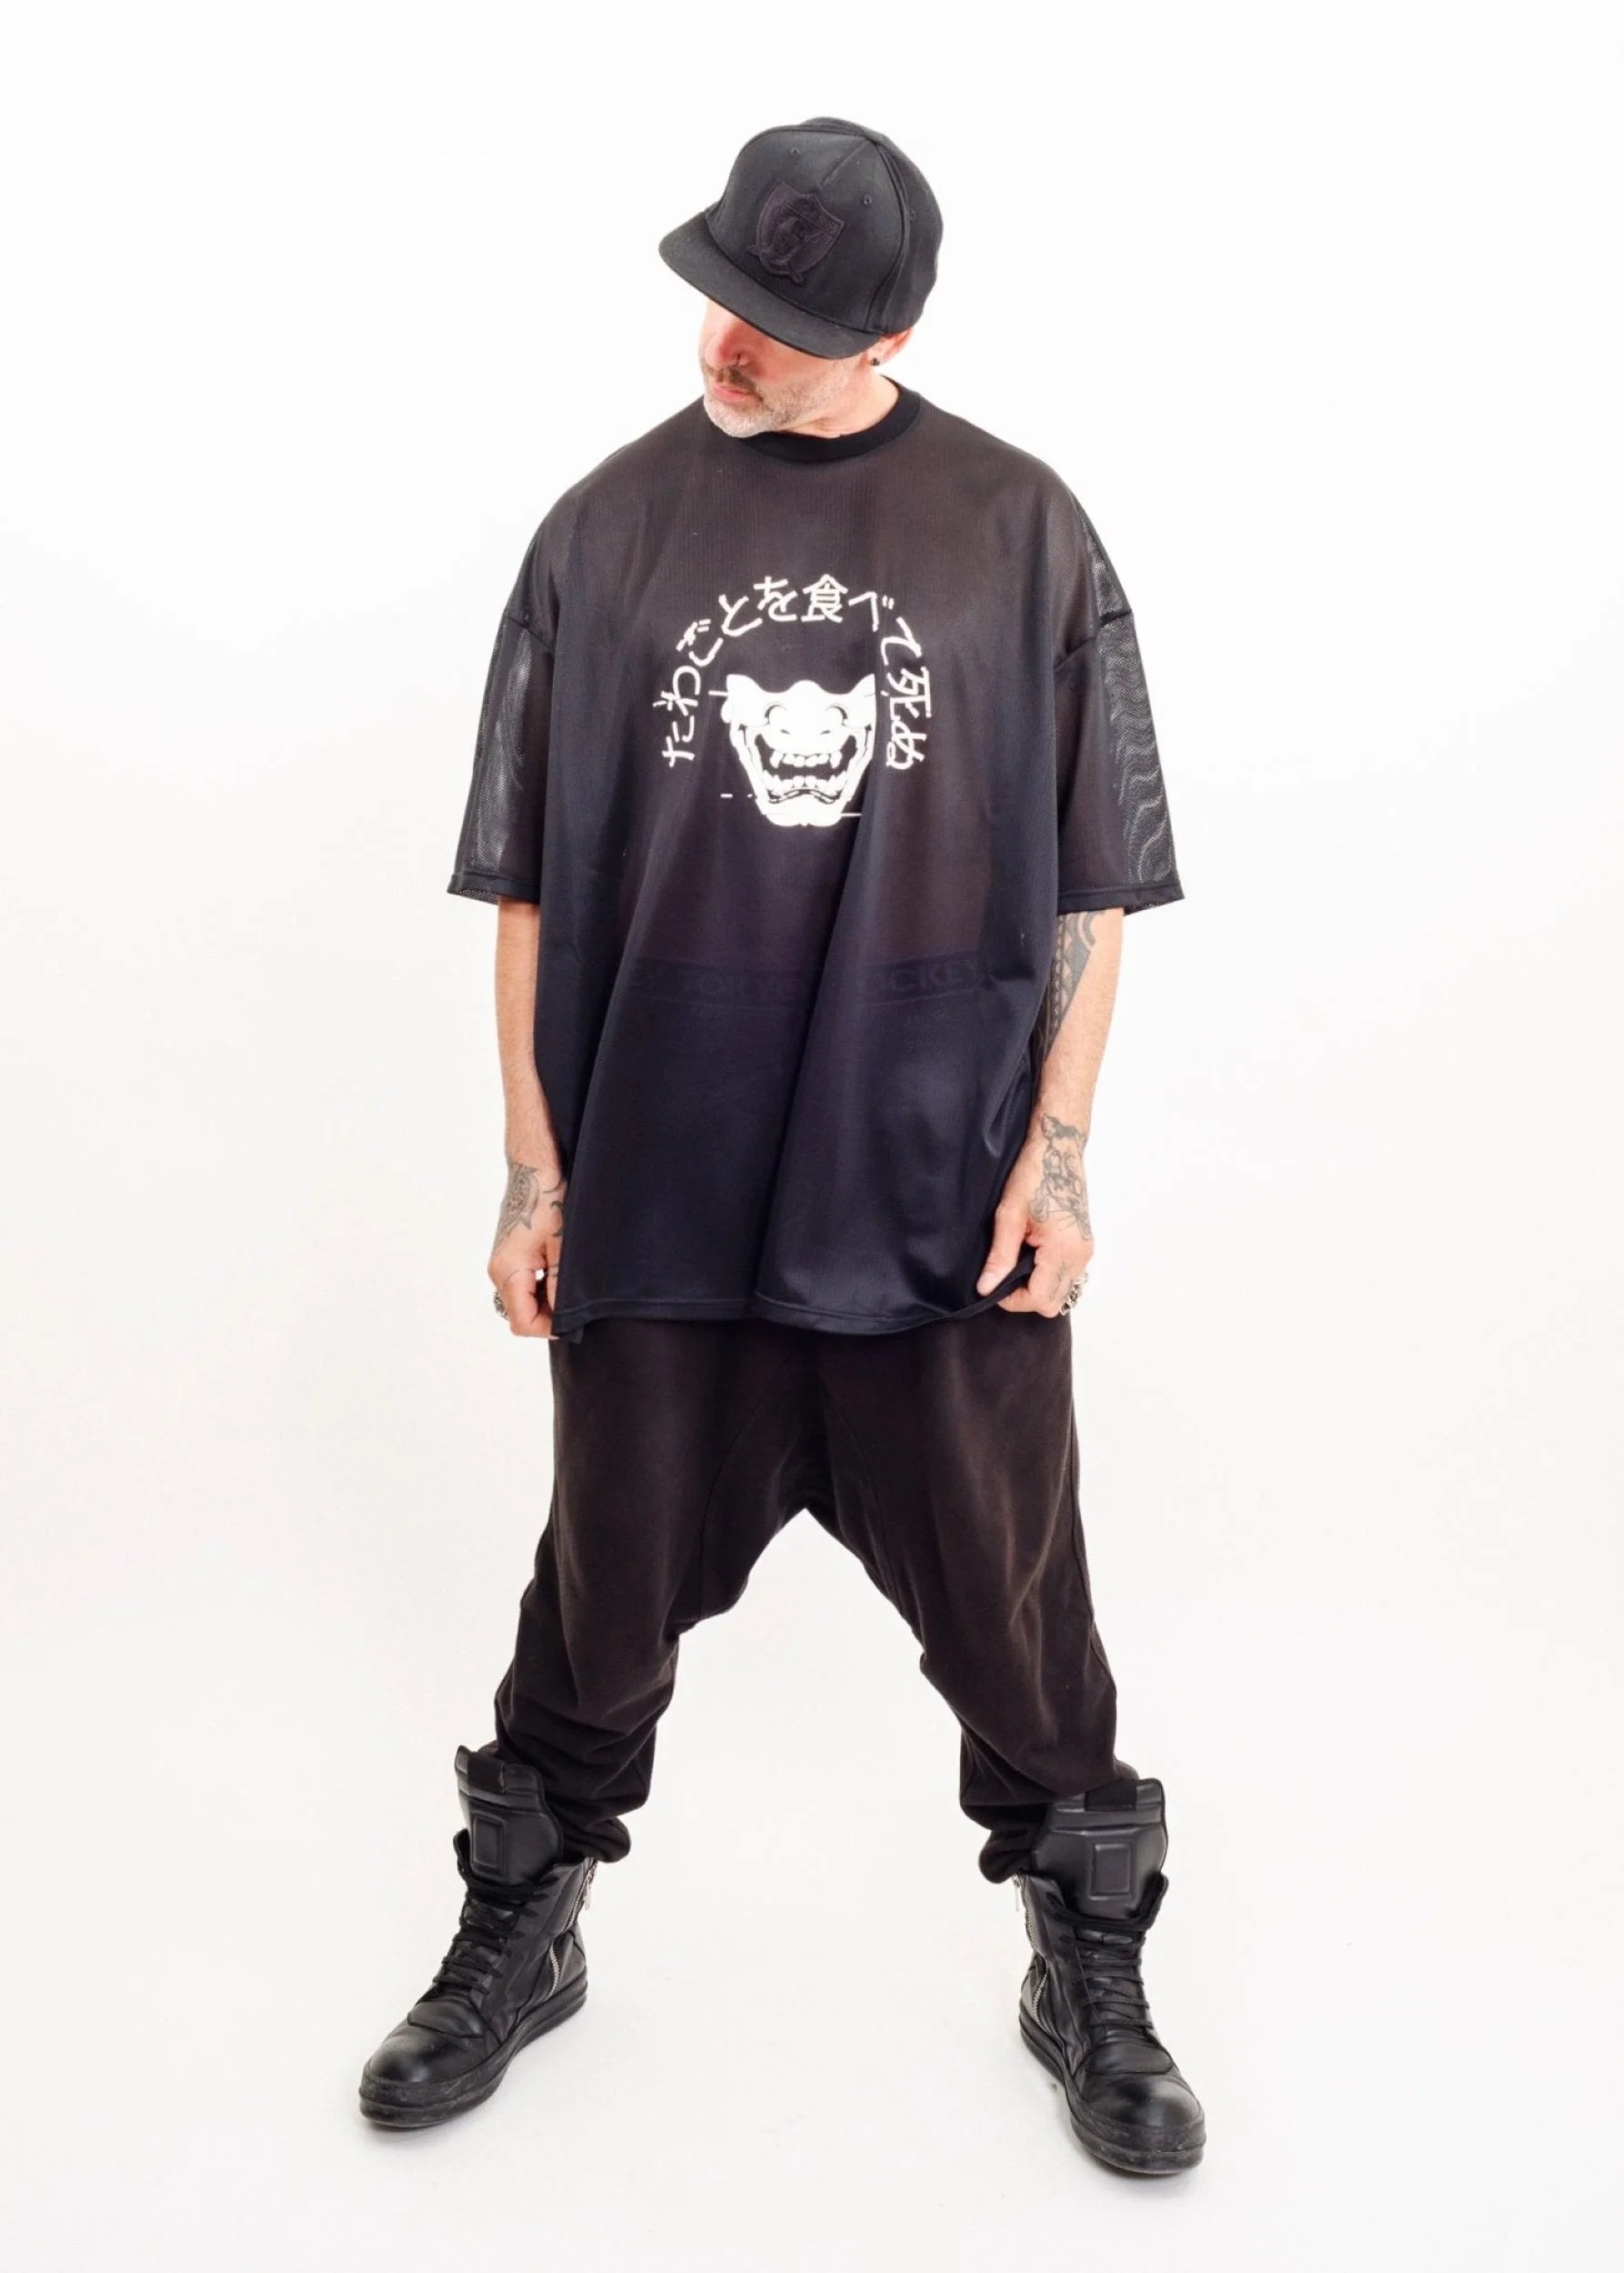 Clark Dean “Eat Shit and Die” oversized mesh t-shirt